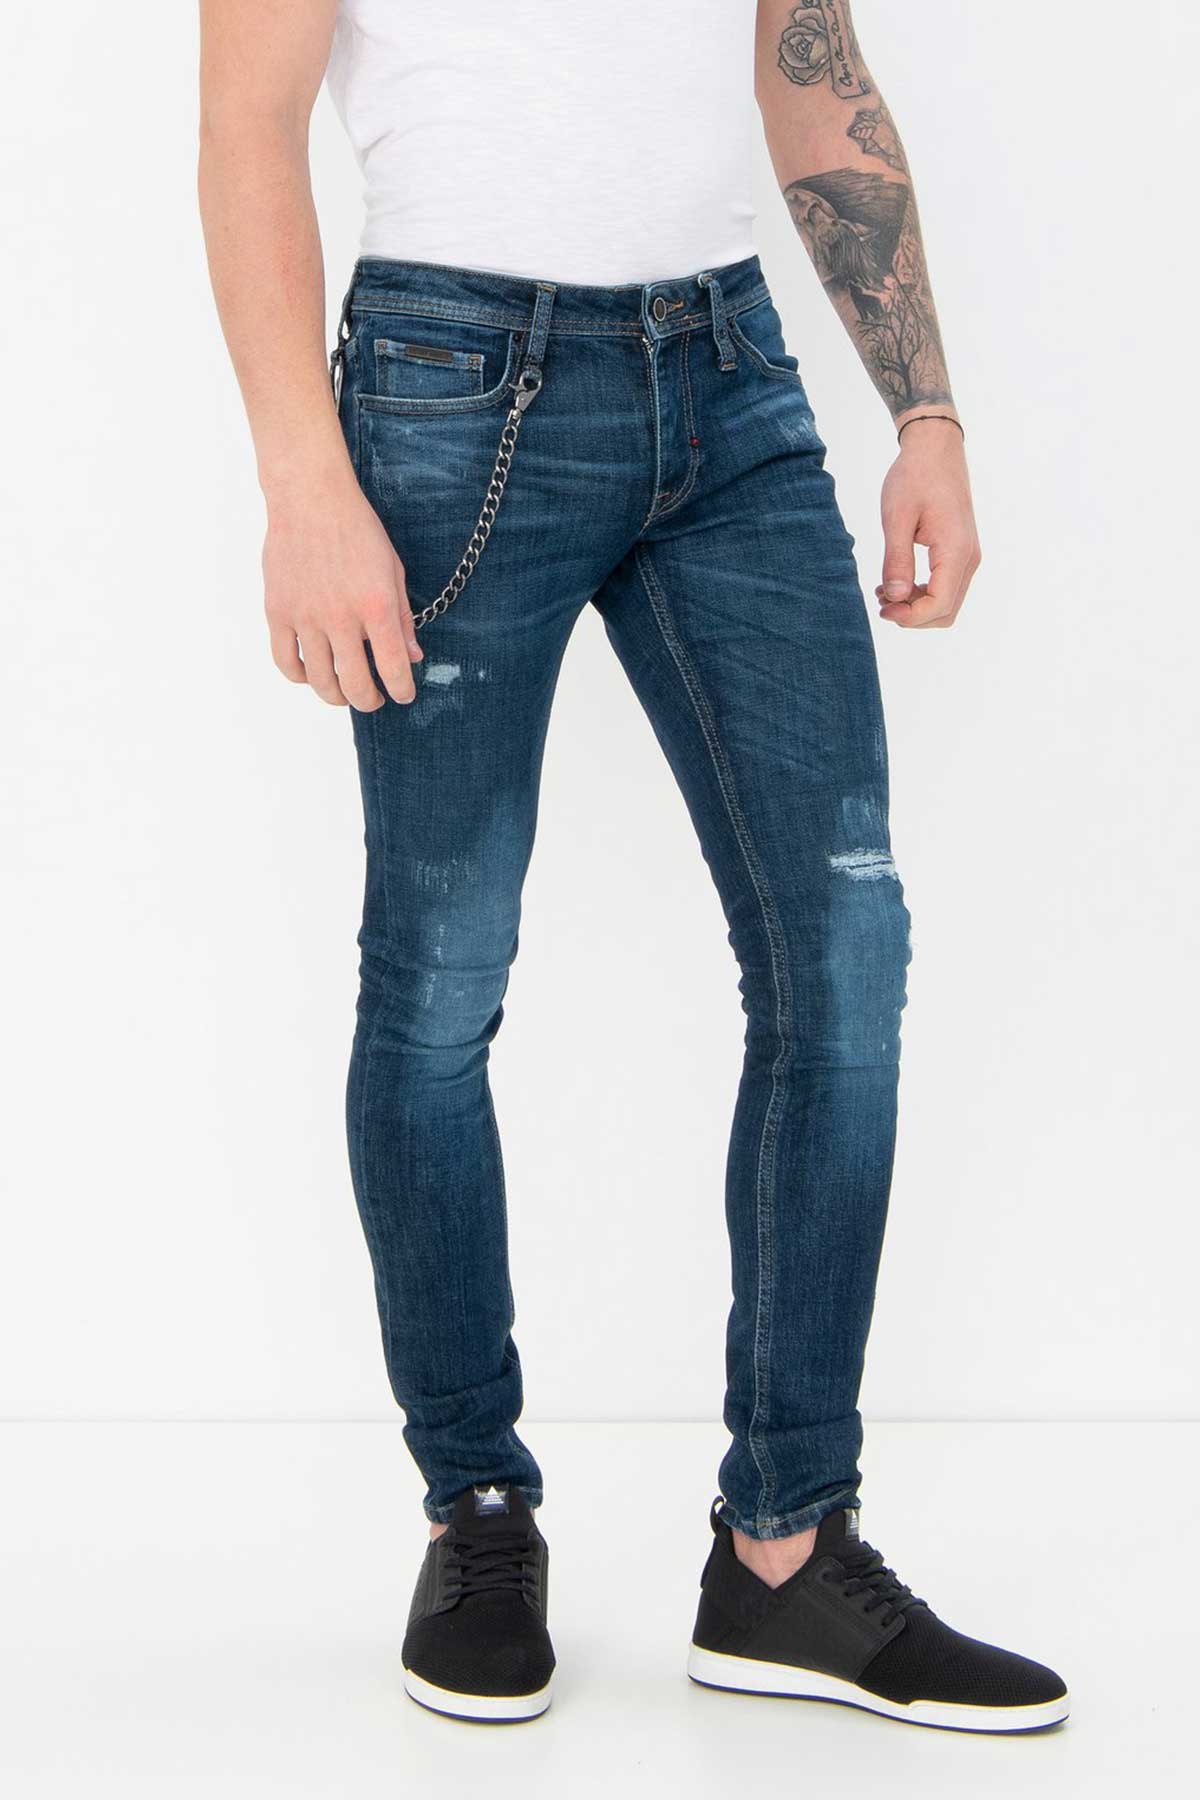 Antony Morato Iggy Tapered Fit Jeans-Libas Trendy Fashion Store